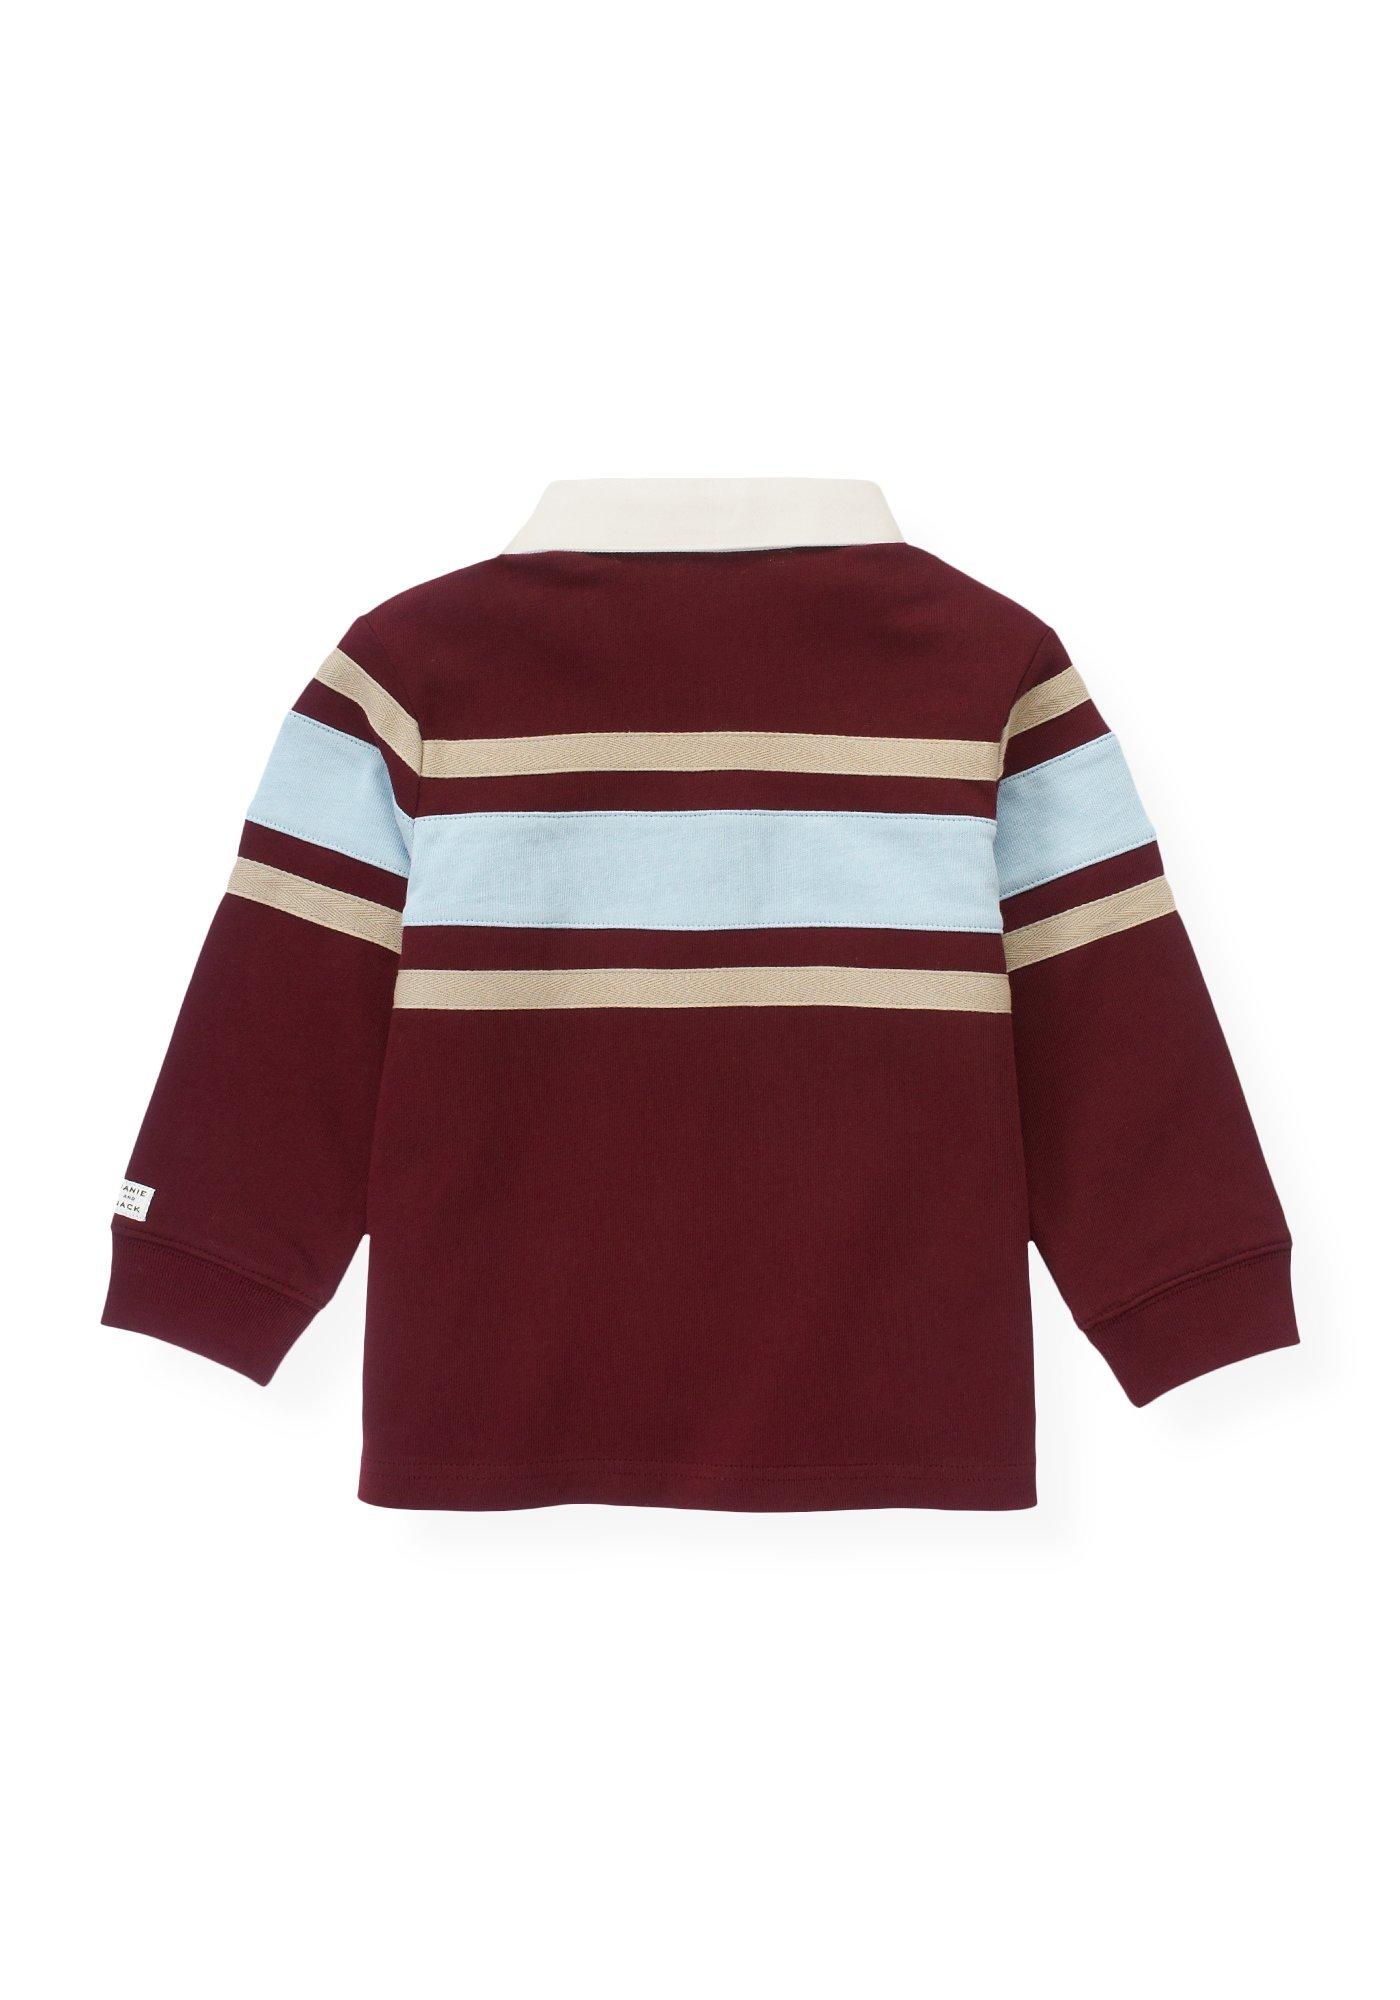 Stripe Rugby Shirt image number 1